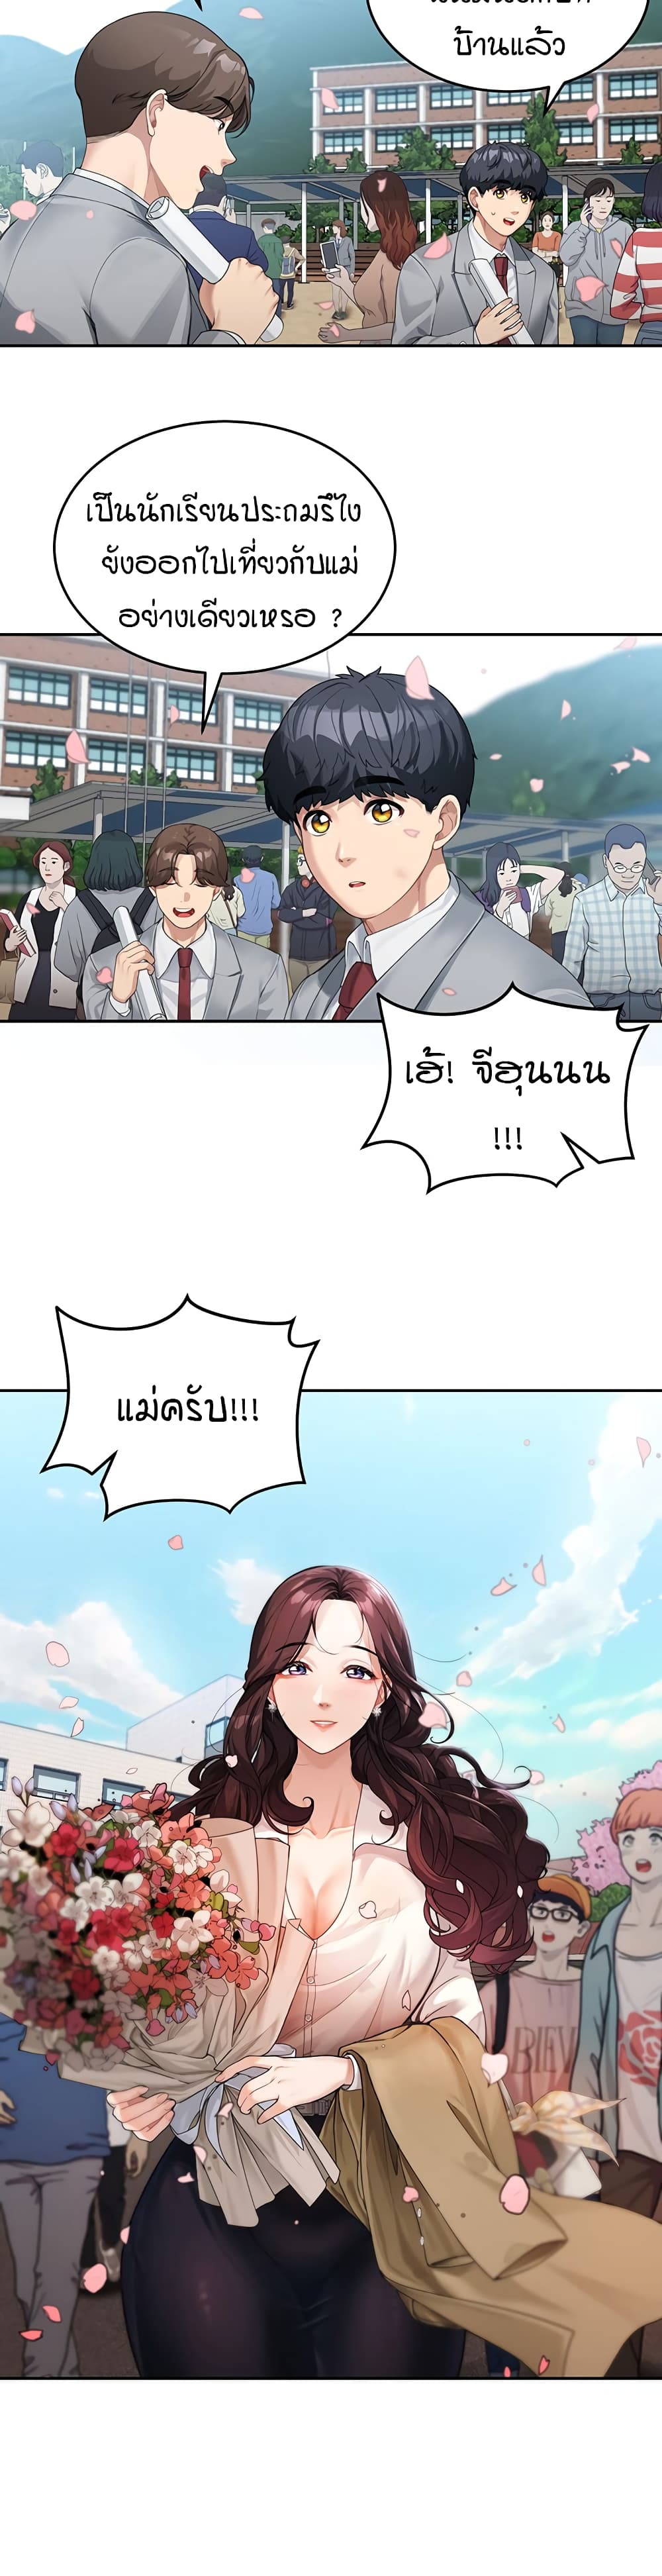 Is It Your Mother or Sister? ตอนที่ 1 ภาพ 18